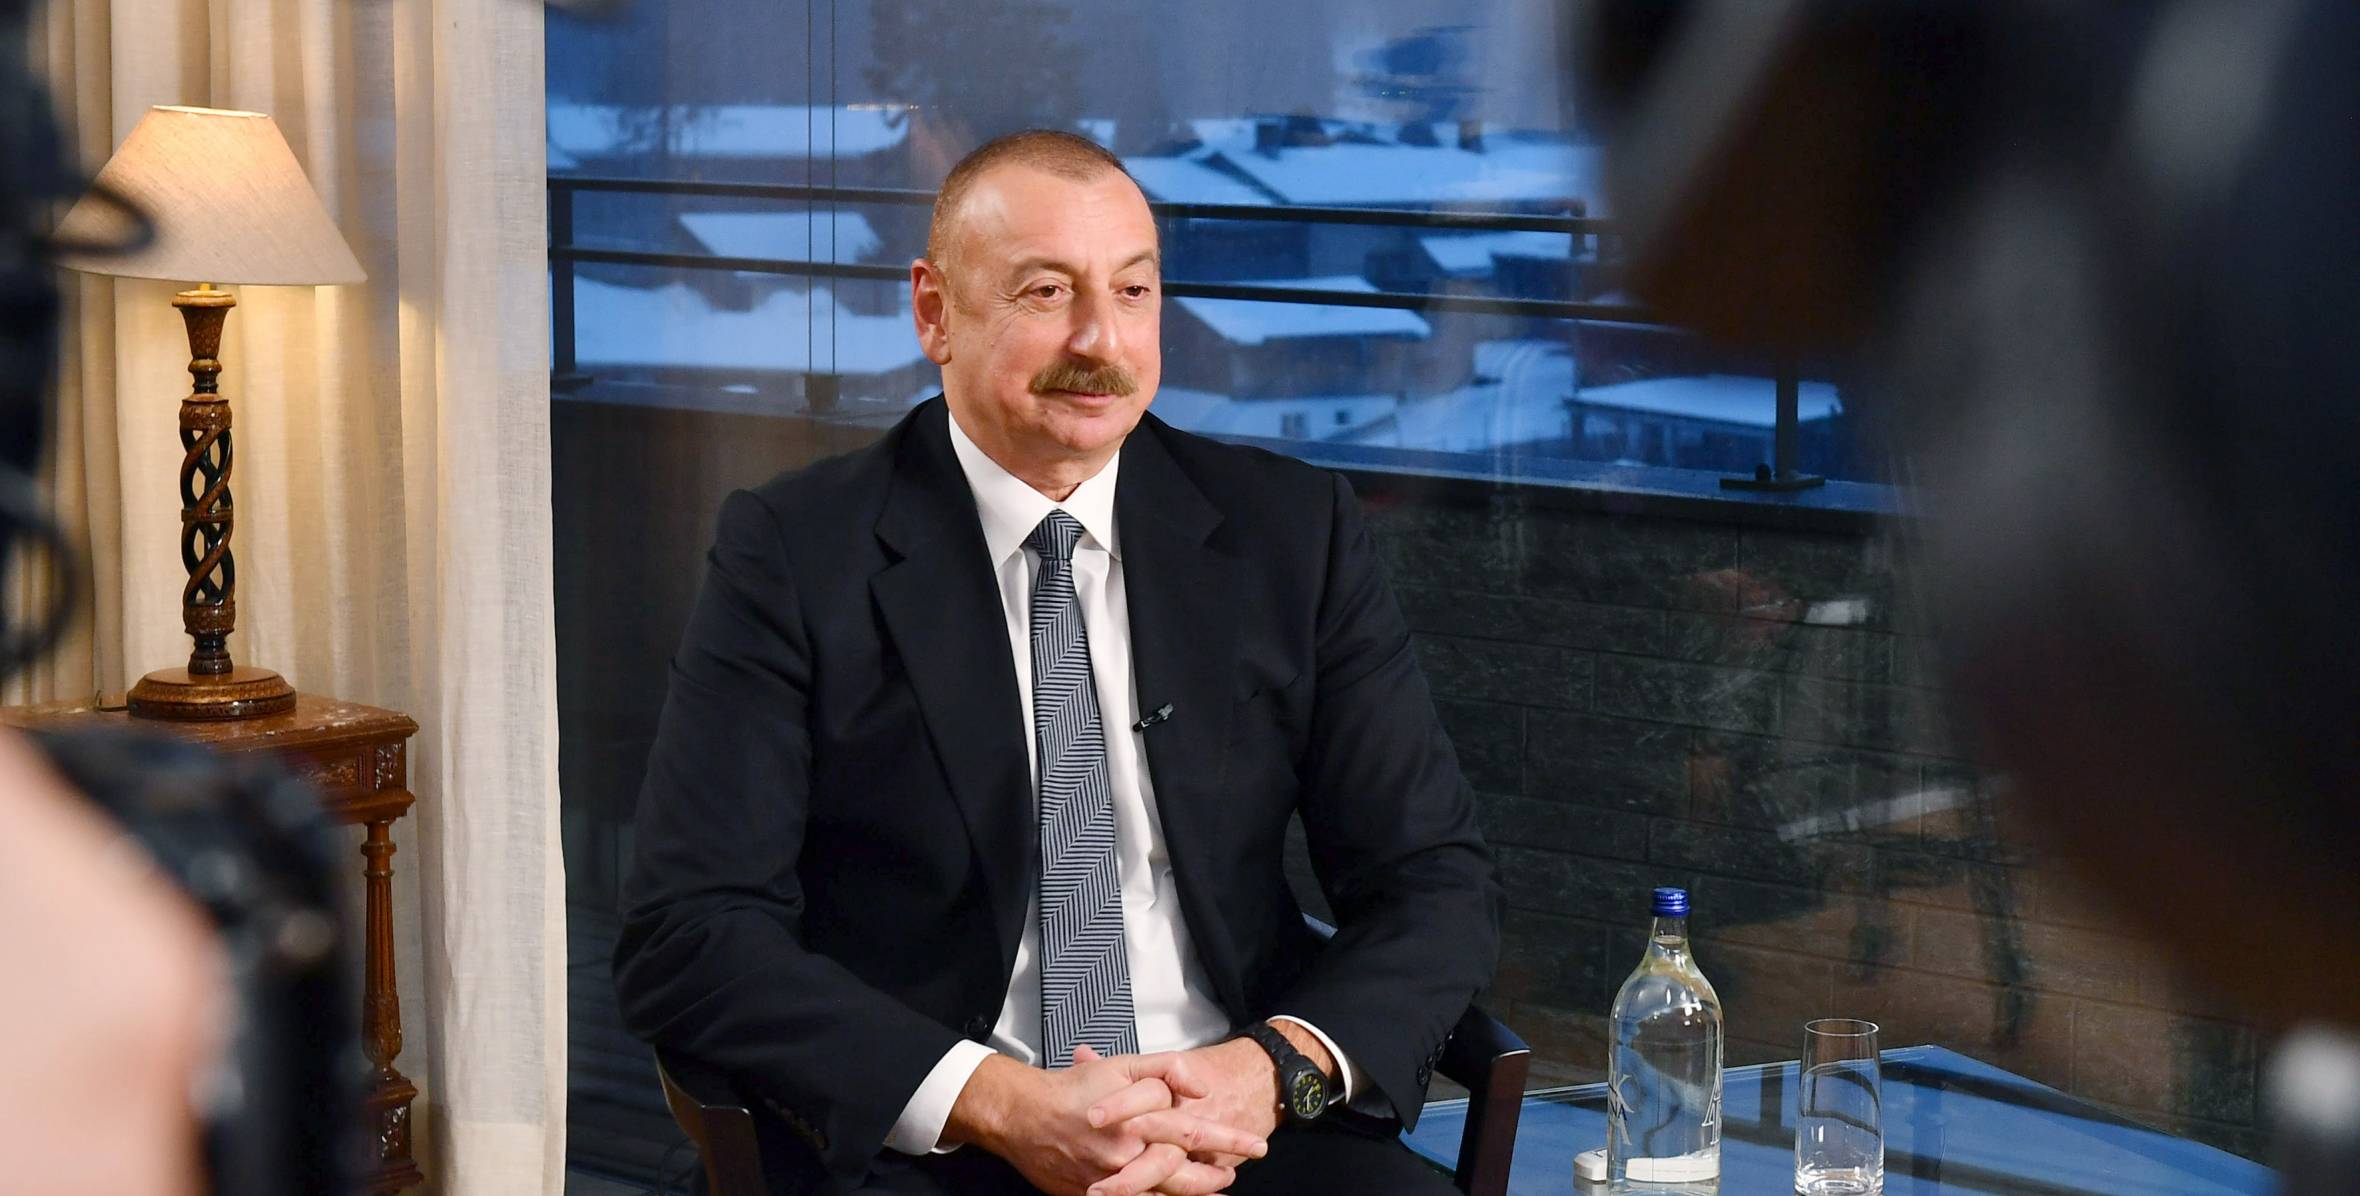 Ilham Aliyev was interviewed by China's CGTN TV channel in Davos